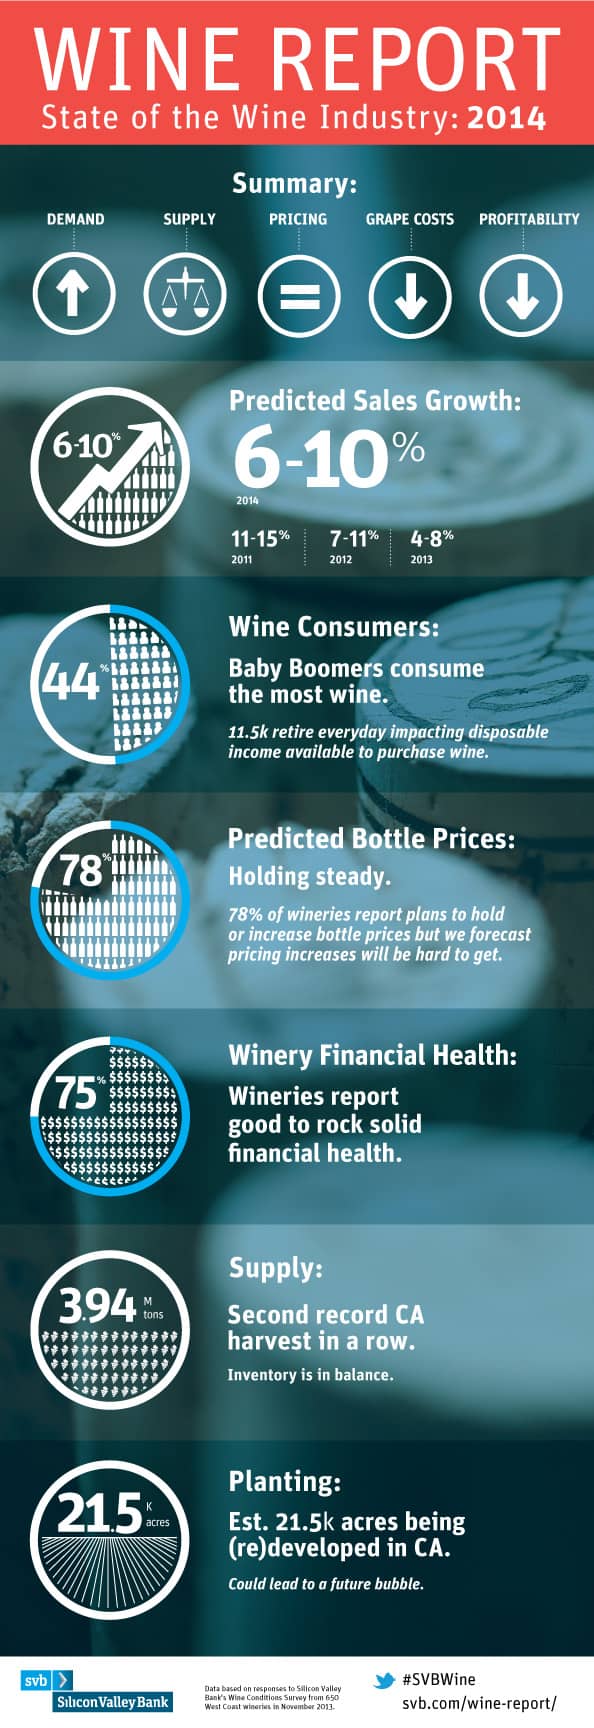 Silicon Valley Bank Wine Report - Infographic